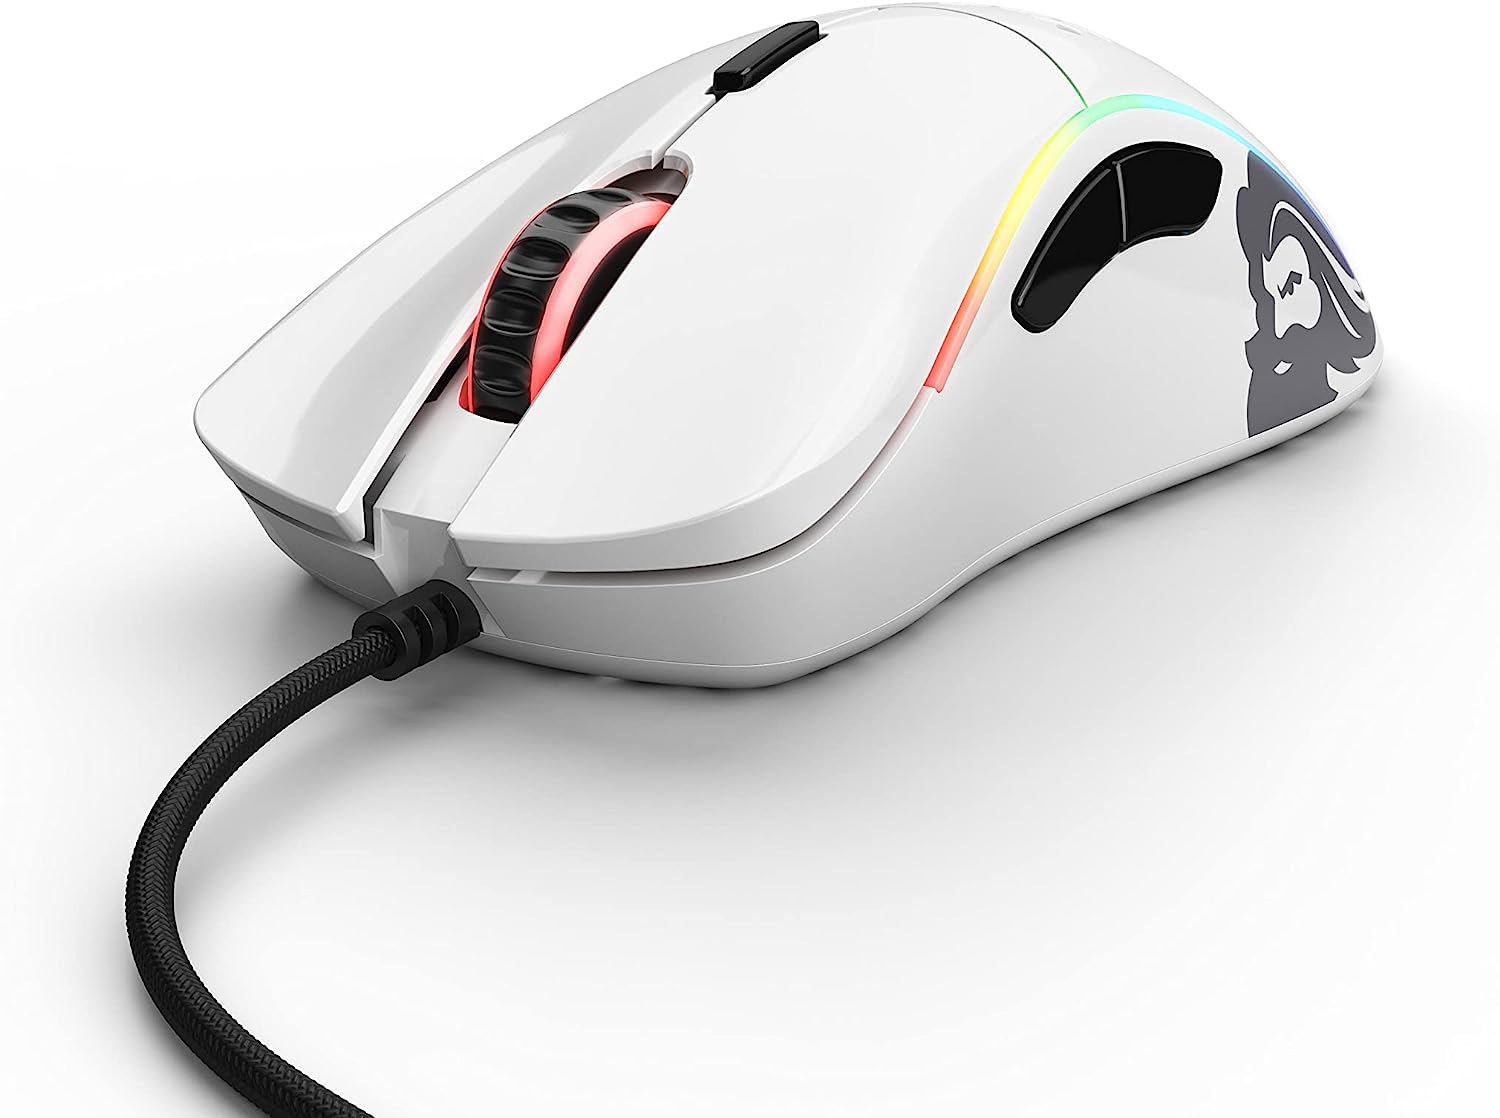 Glorious Model D-/D RGB Gaming Mouse